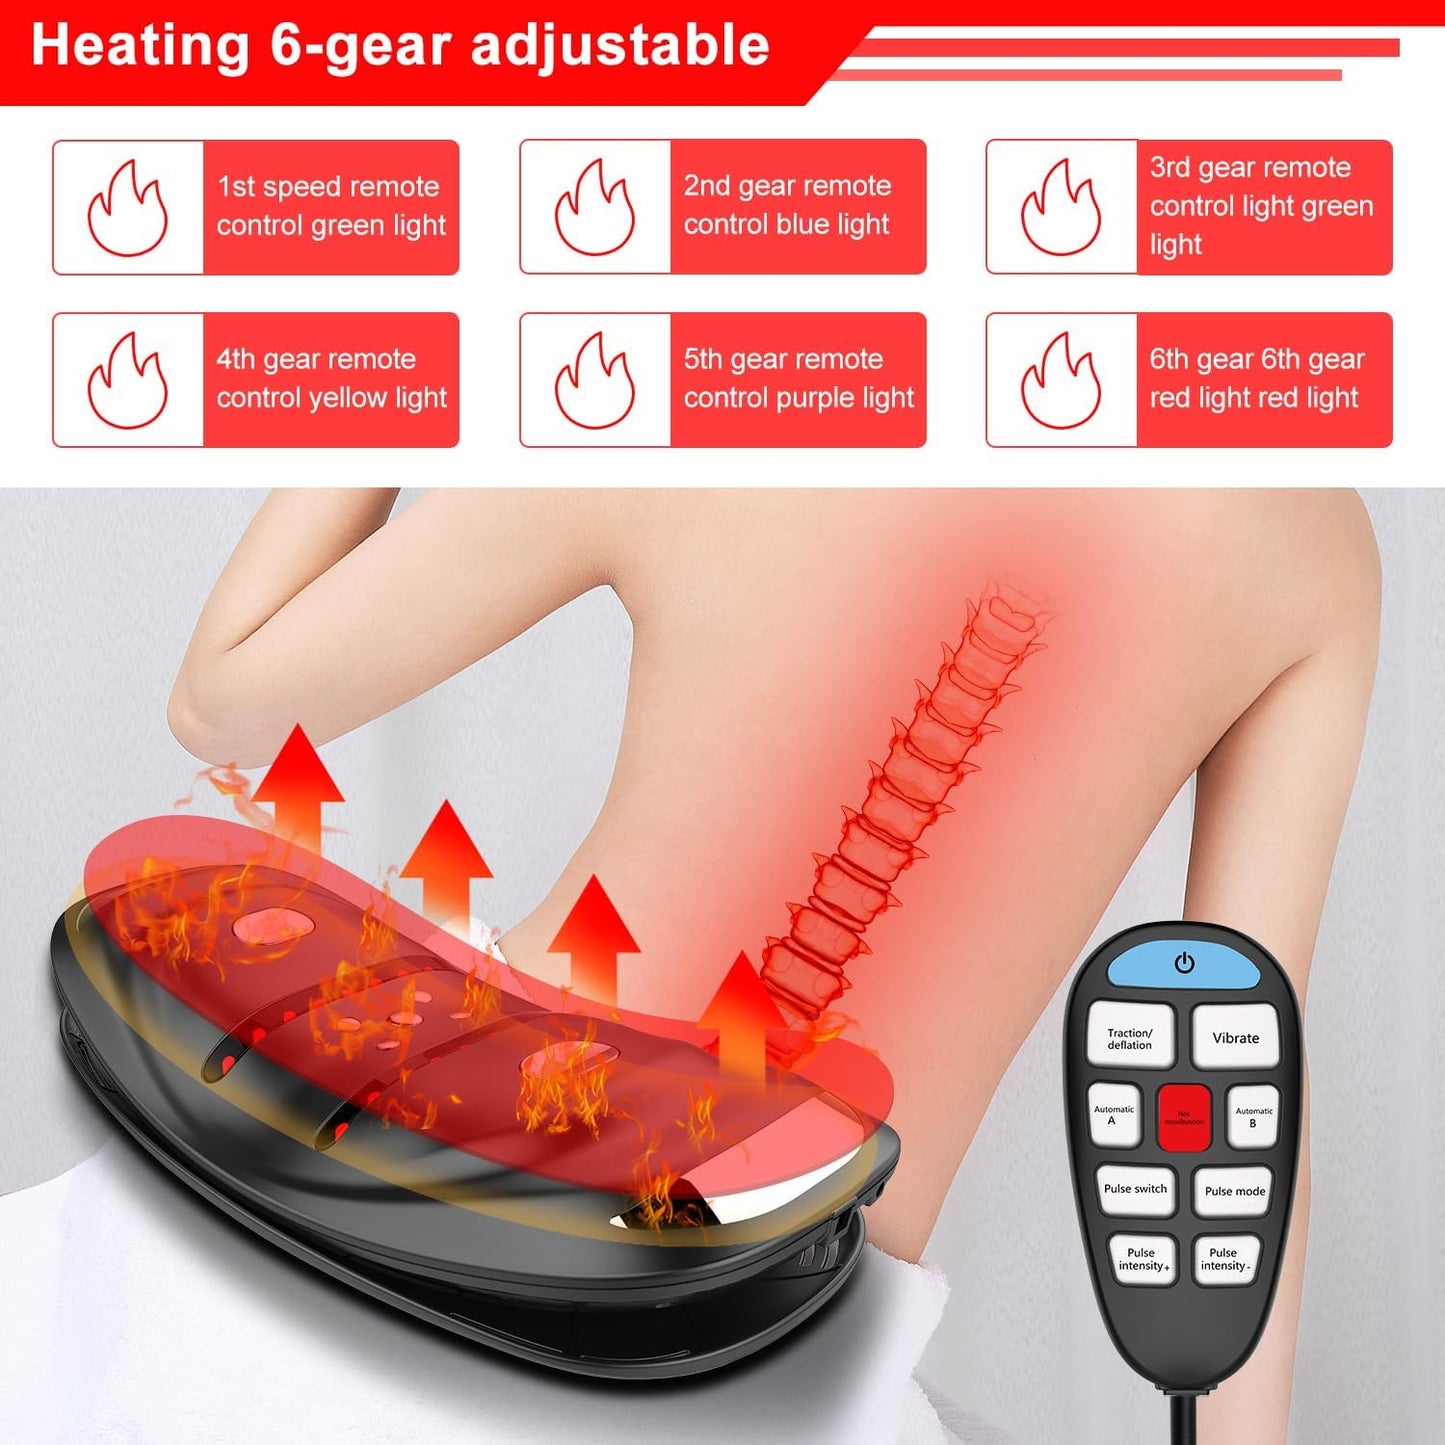 Electric Lumbar Traction Device Massager with 20 PCS massage pads,Lumbar/Back Massager With Heat,Sciatic Nerve Back Massager,Traction Device For Back Pain,Heat Function & Adjustable Intensity